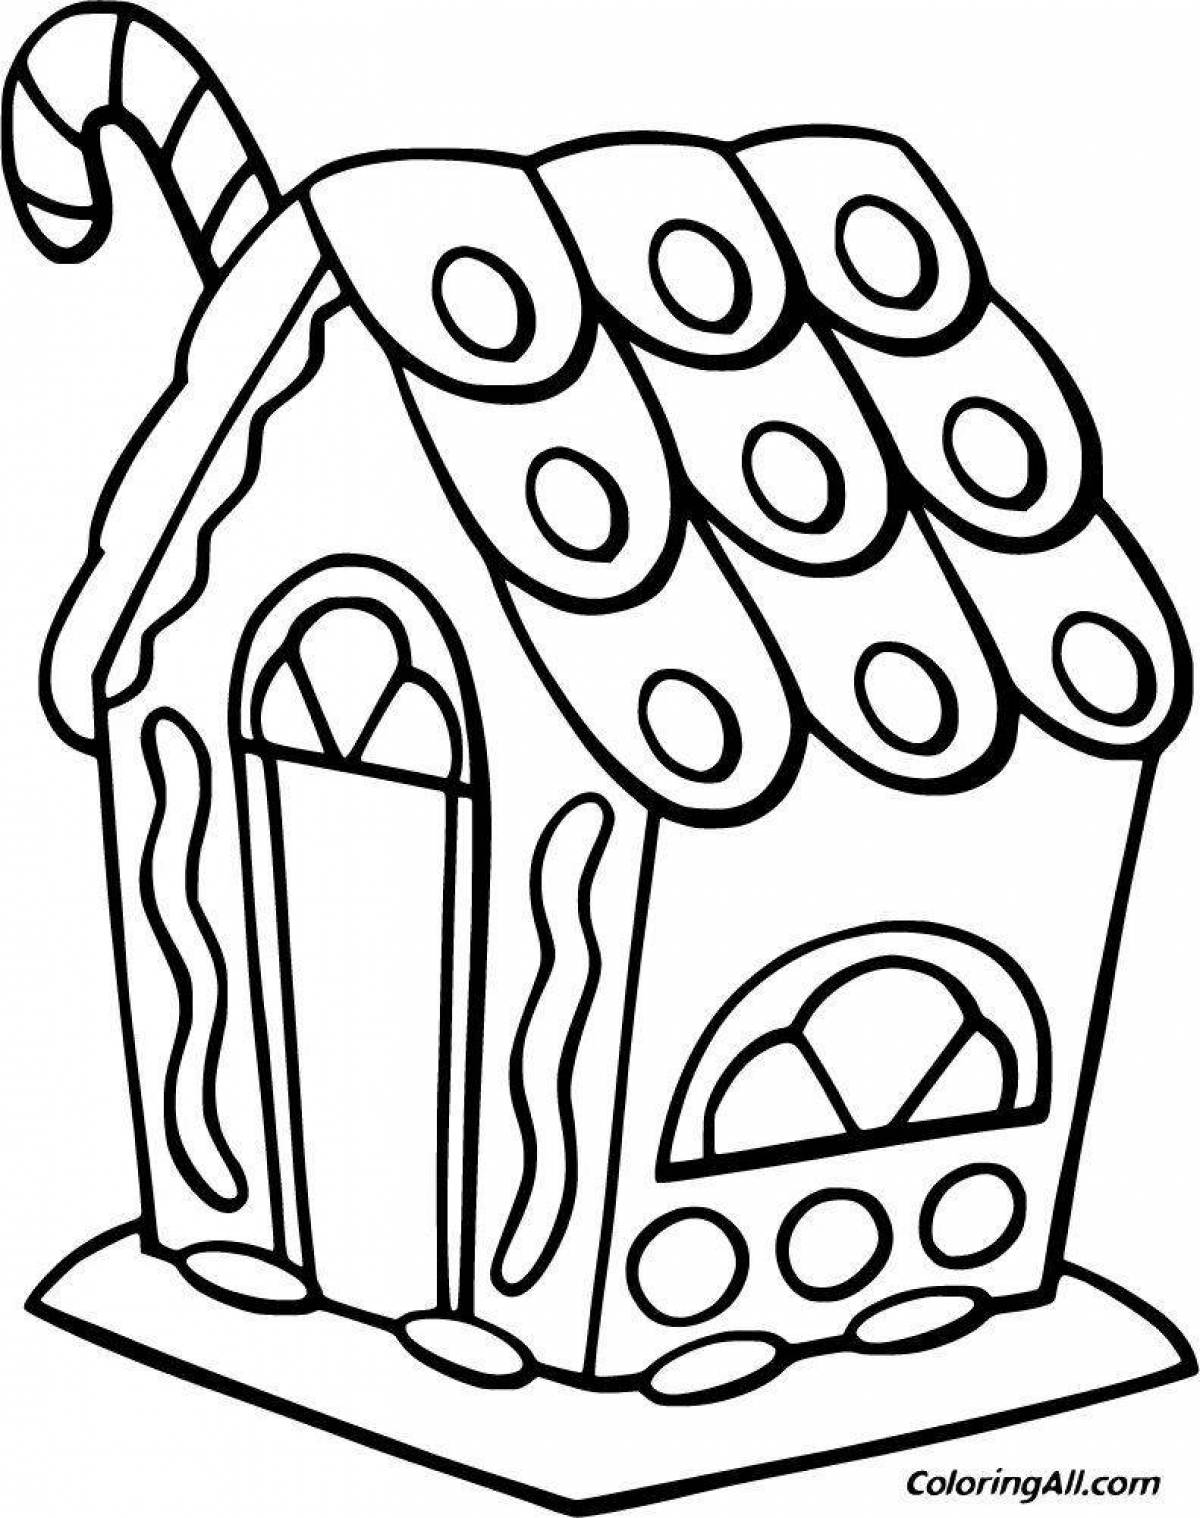 Coloring page charming Christmas house